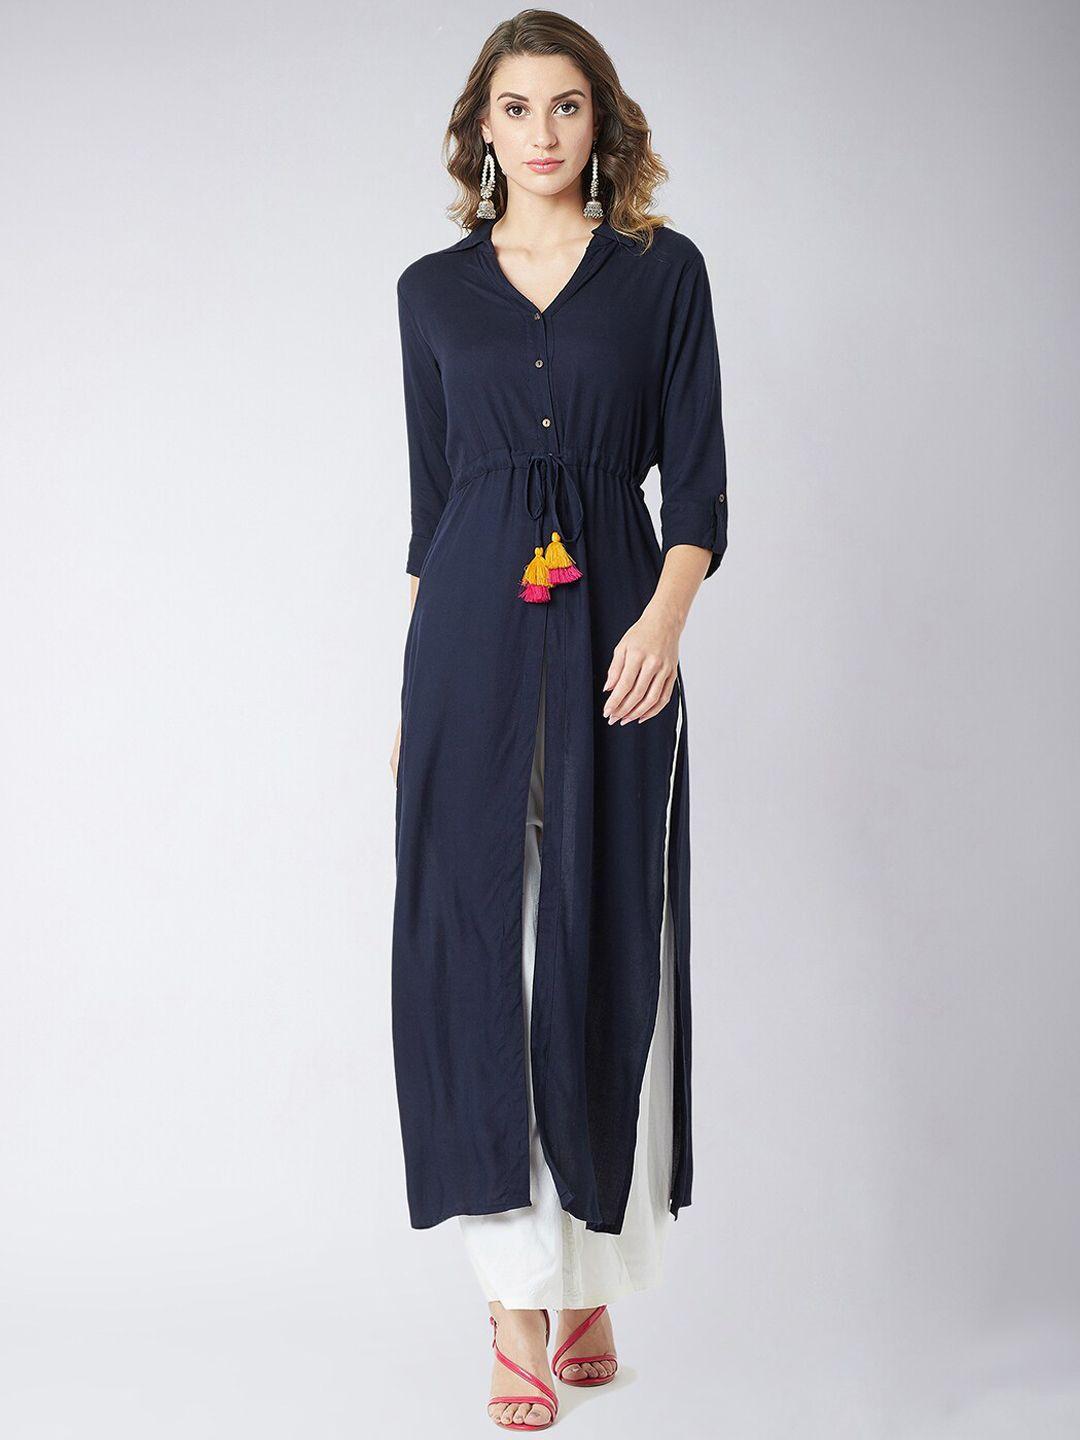 miss chase navy blue shirt collar pure cotton maxi longline top